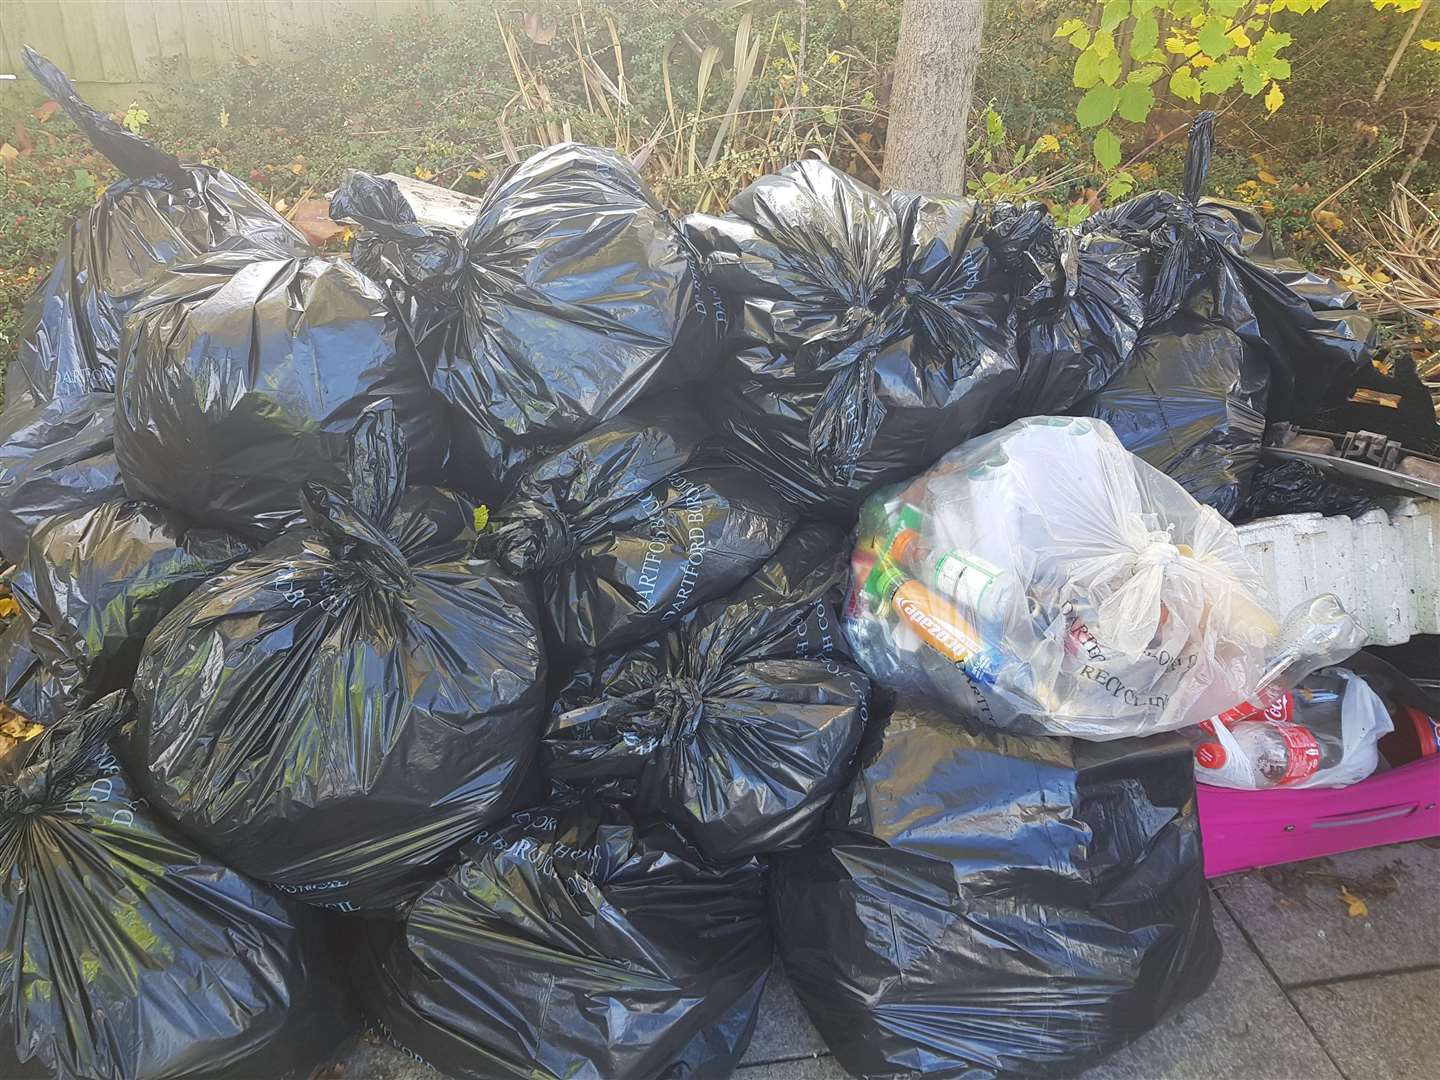 Bags of rubbish collected by the group while out patrolling the streets of Dartford. (20904056)